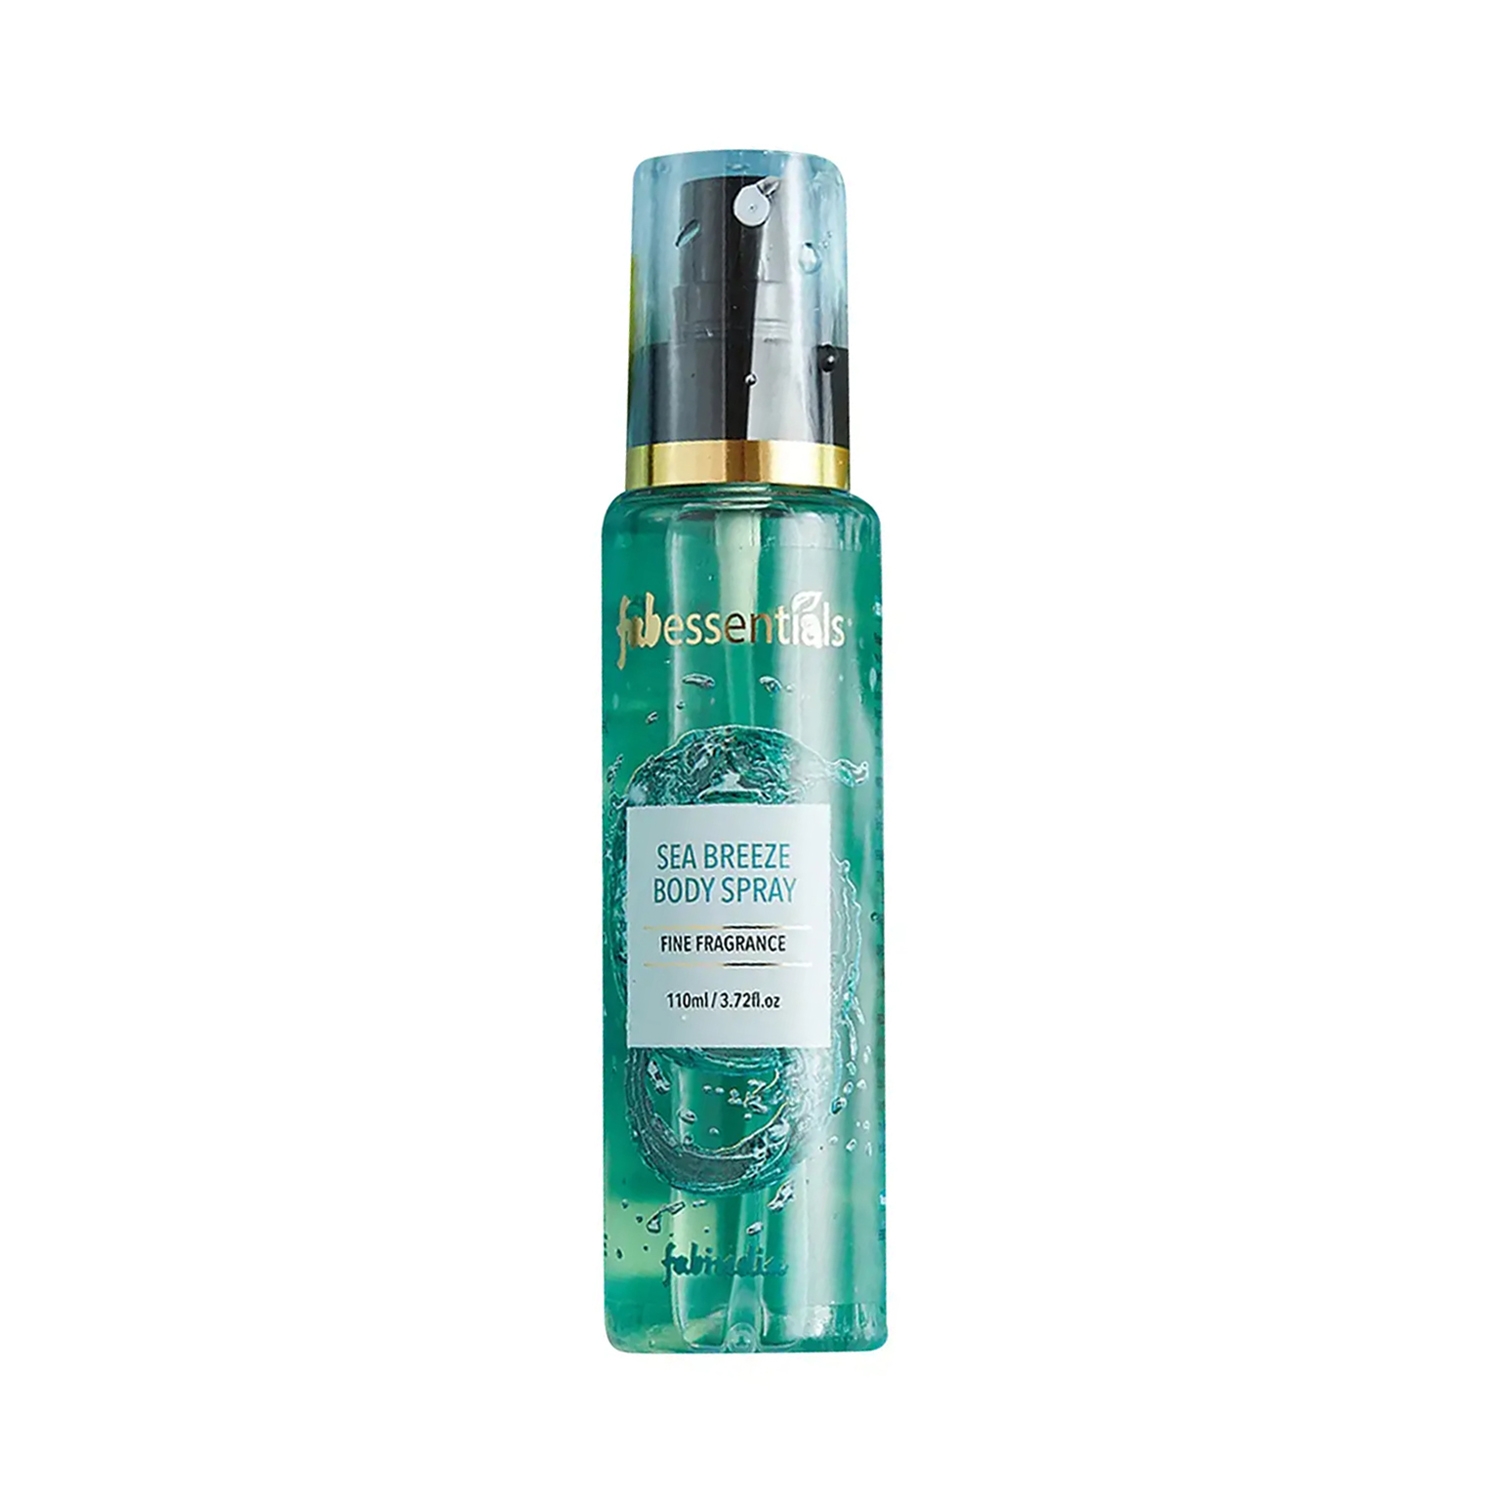 Fabessentials by Fabindia | Fabessentials by Fabindia Sea Breeze Body Spray (110ml)